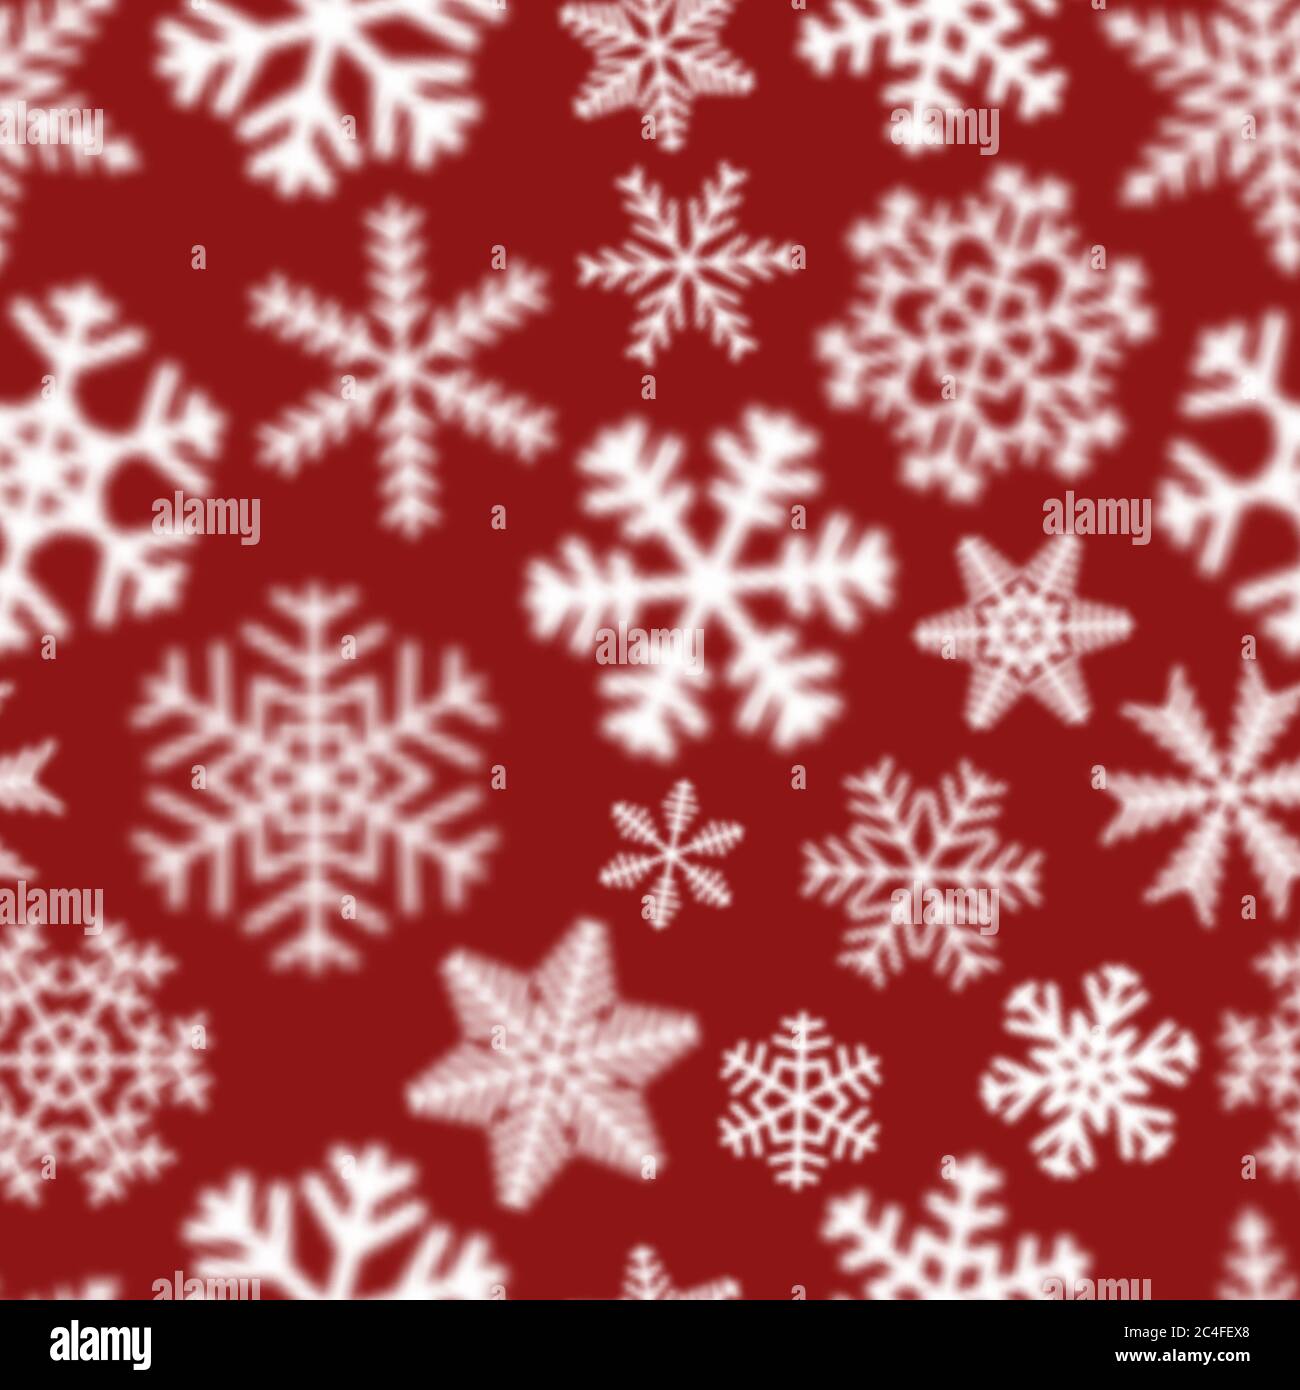 White snowflakes on red background, Stock vector